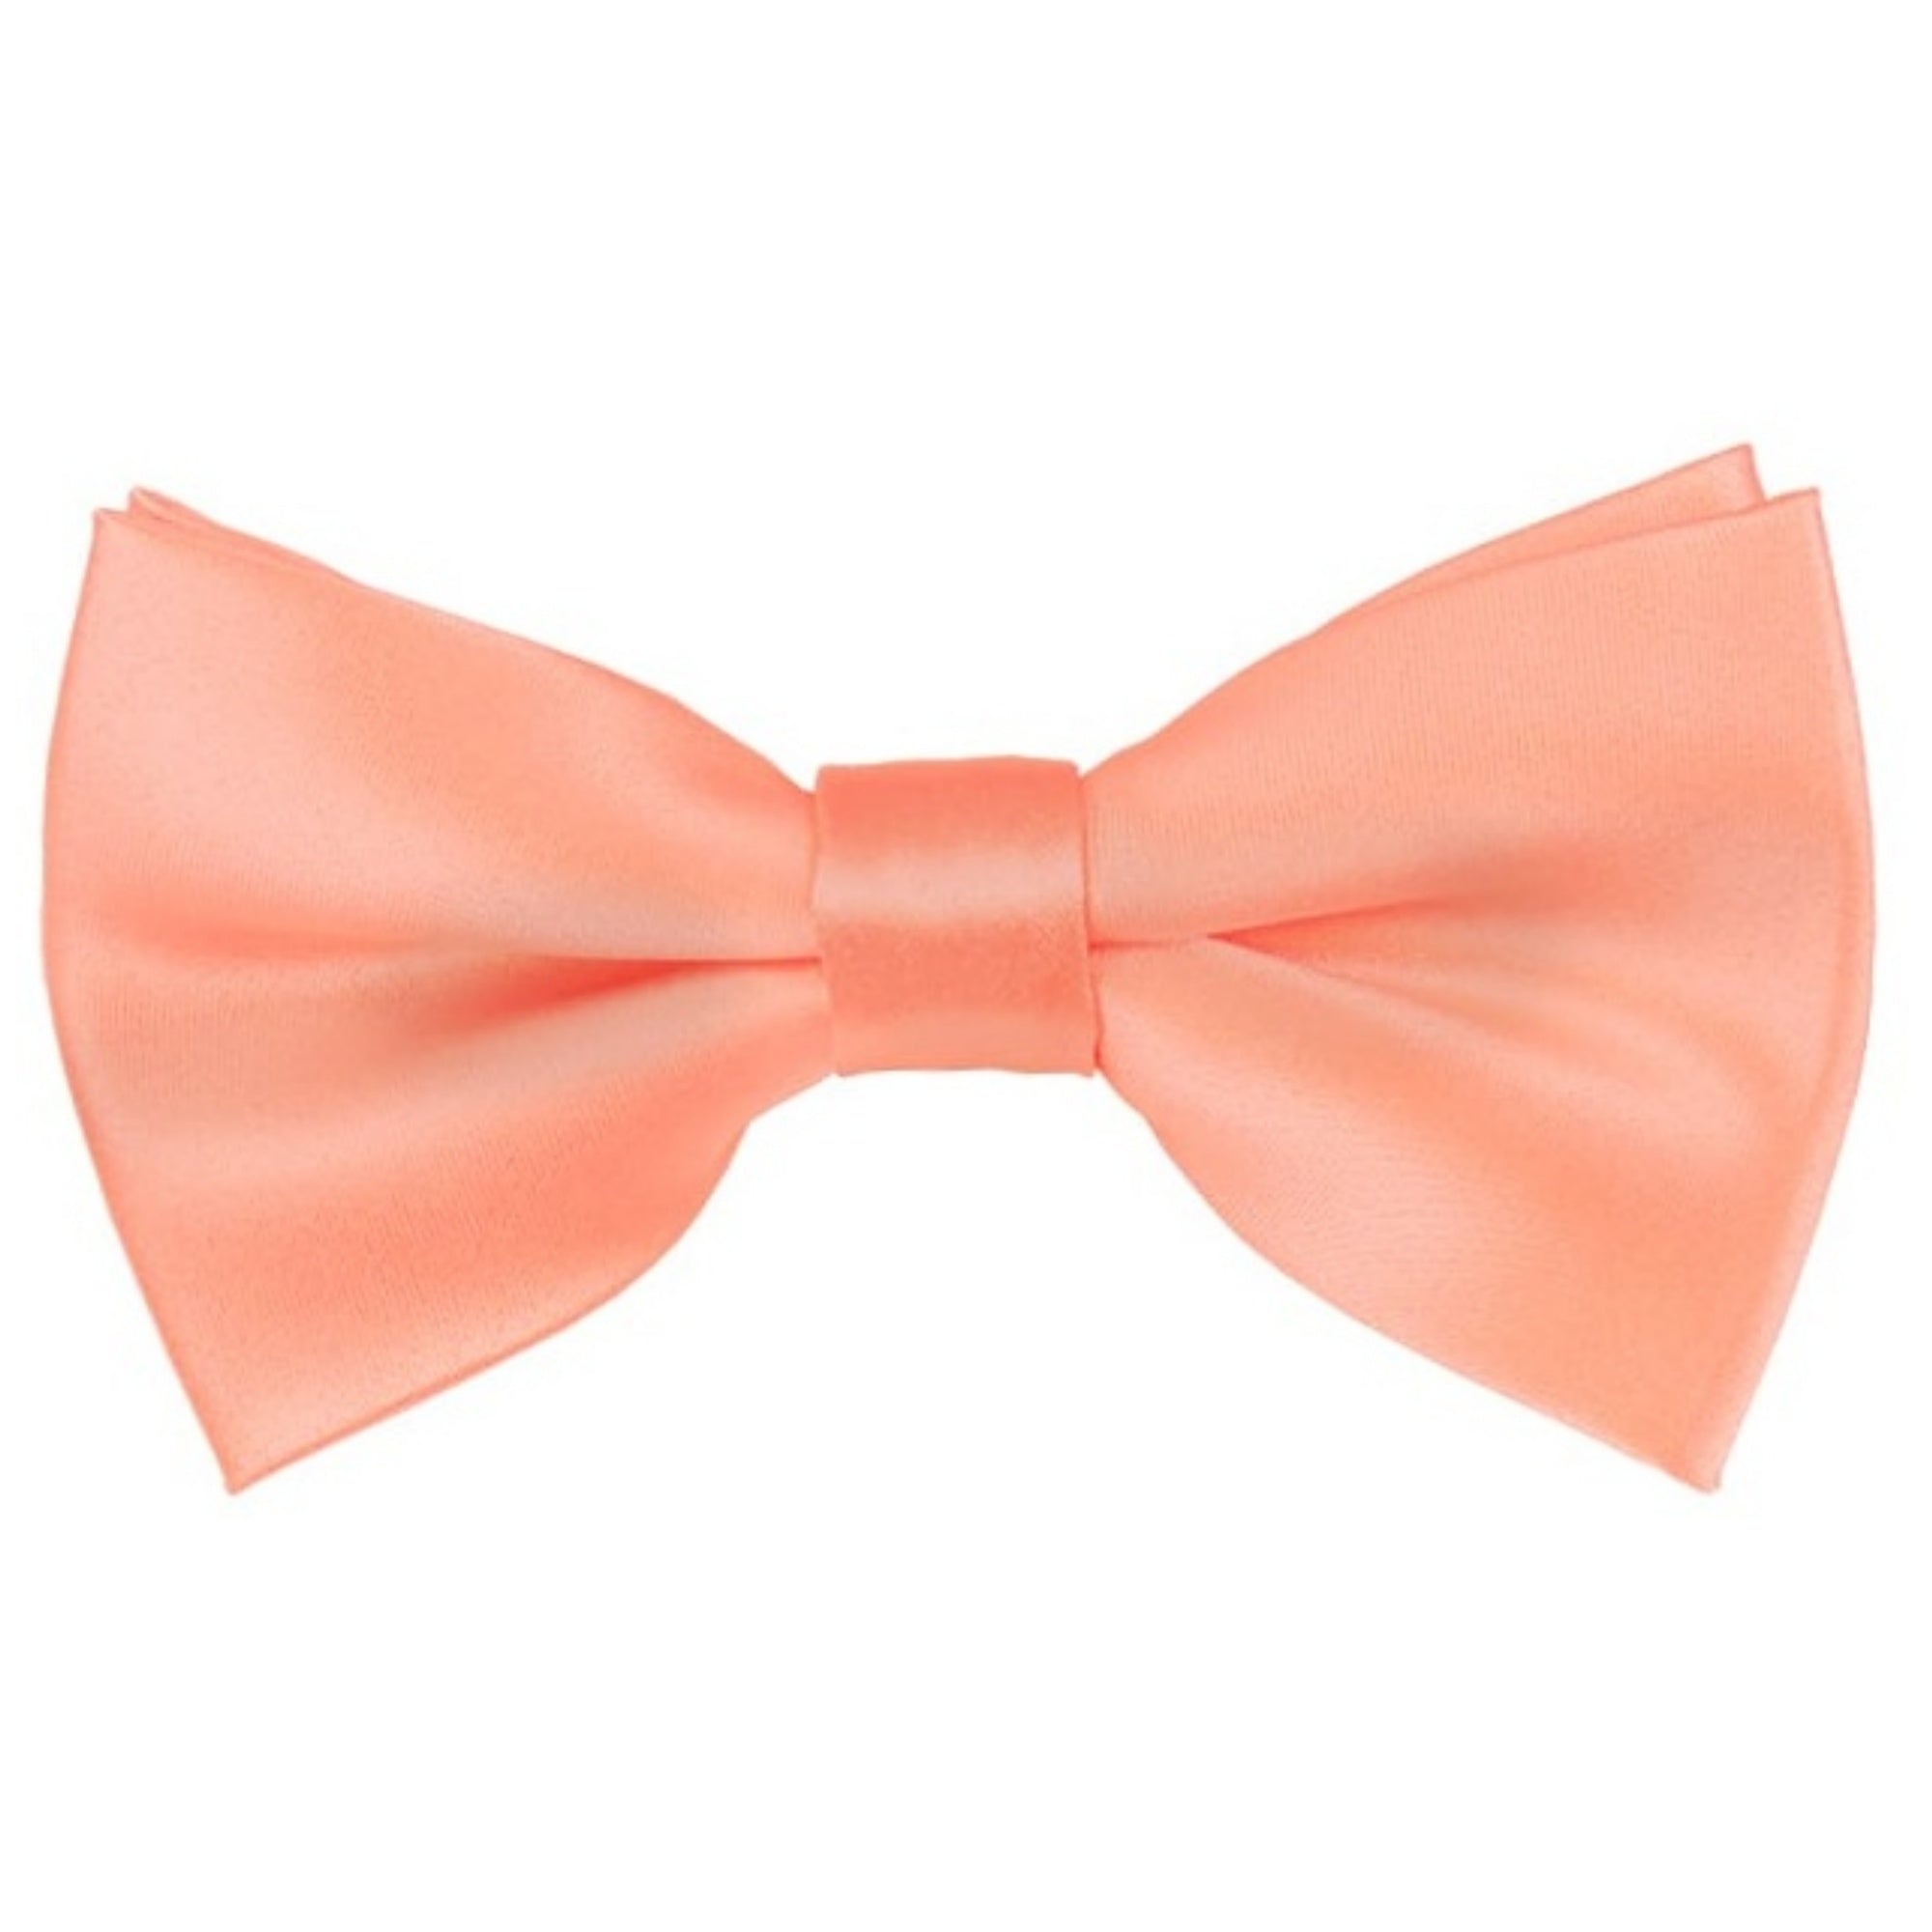 TheDapperTie Men's Solid Color 2.5 W And 4.5 L Inch Pre-Tied adjustable Bow Ties Men's Solid Color Bow Tie TheDapperTie Light Salmon  